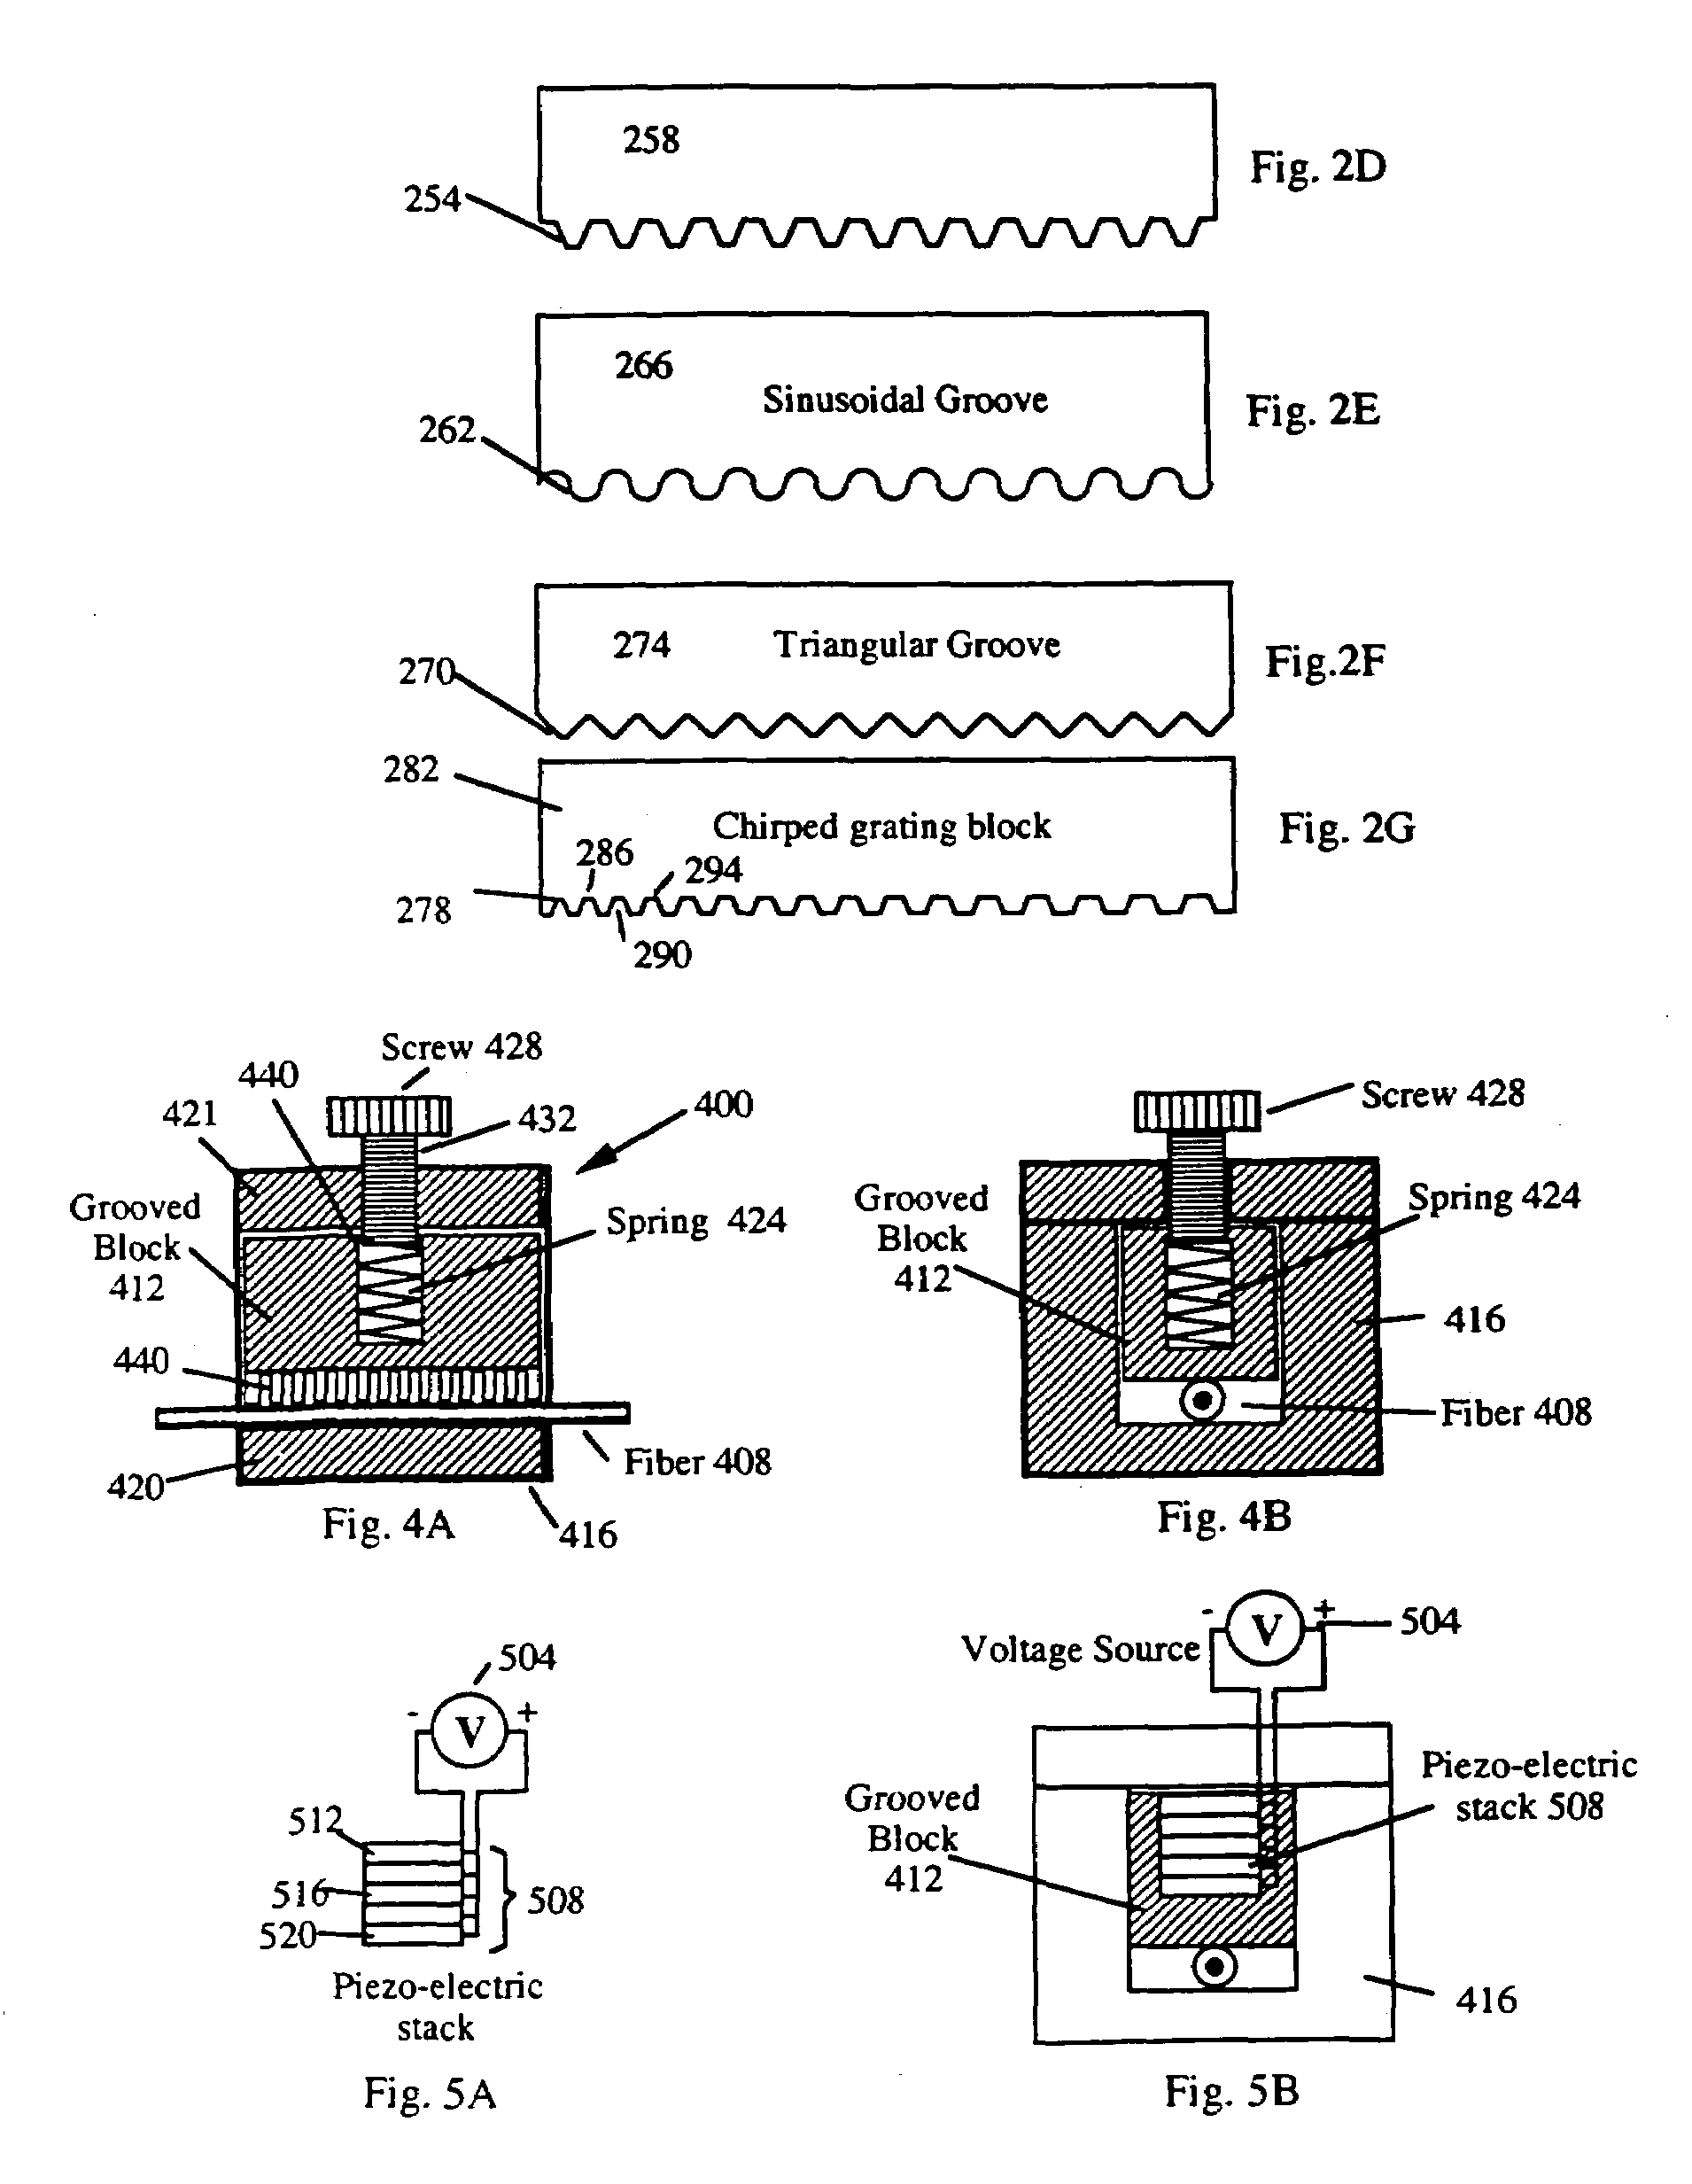 Devices based on optical waveguides with adjustable Bragg gratings